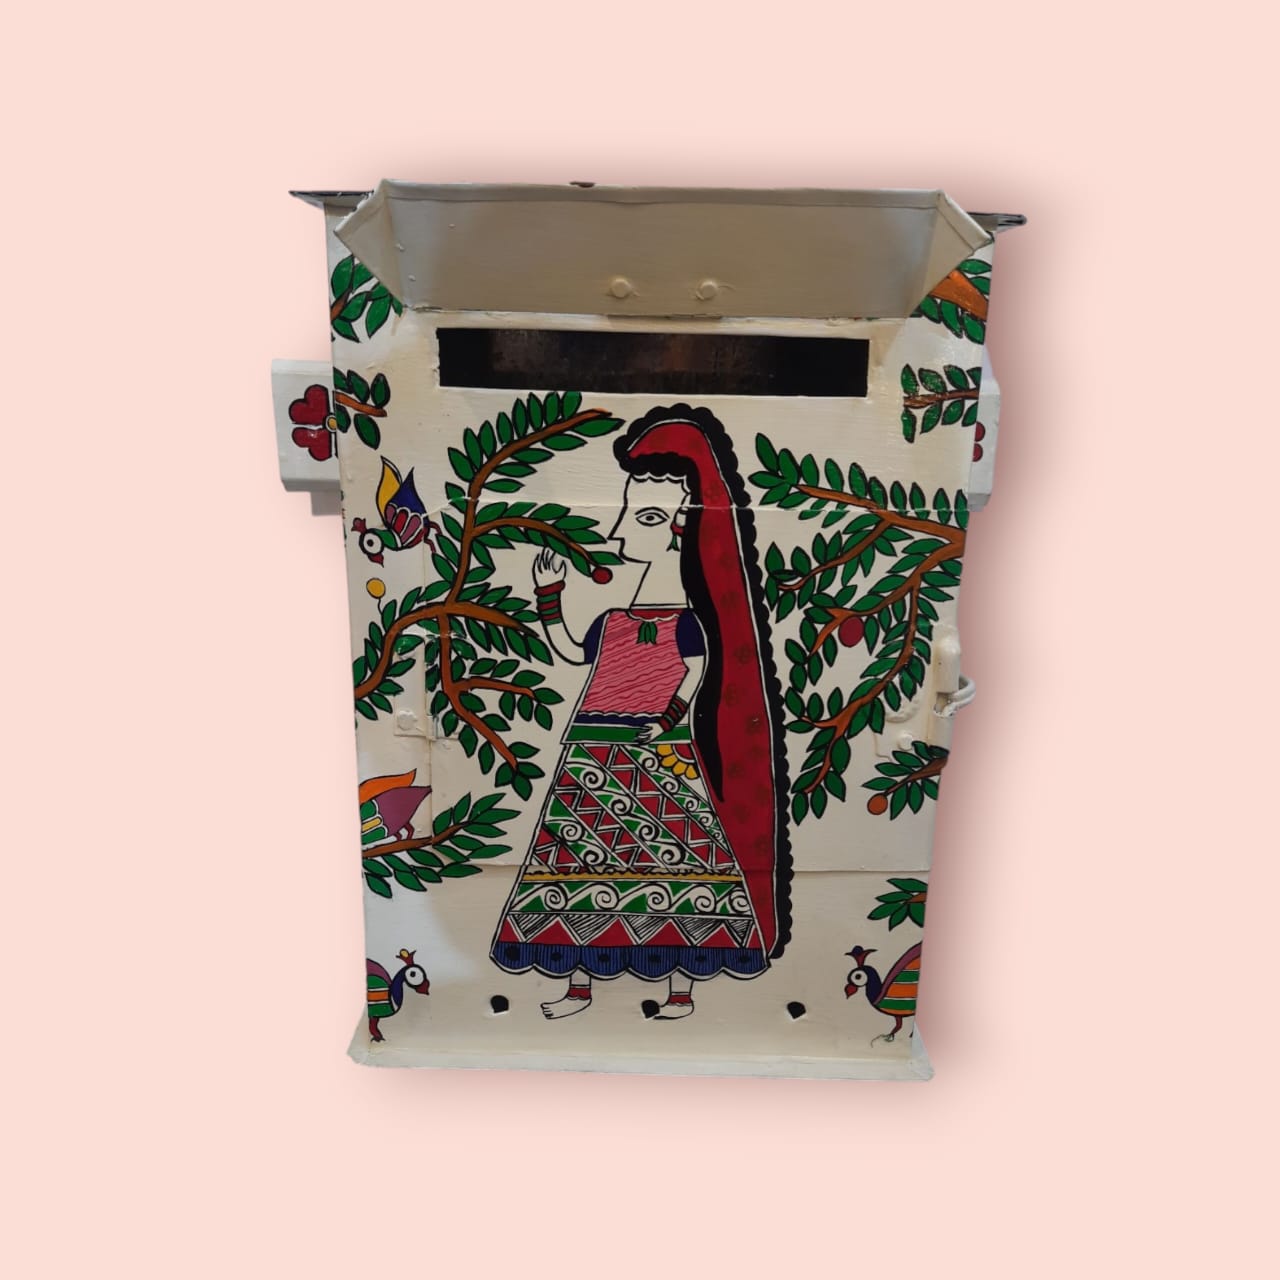 Rajasthani Hand Printed Artistic Mailbox, Postbox, Letter Box, Suggestion, Feedback Box, Personalized Gift, Home Decor (Multicolor)